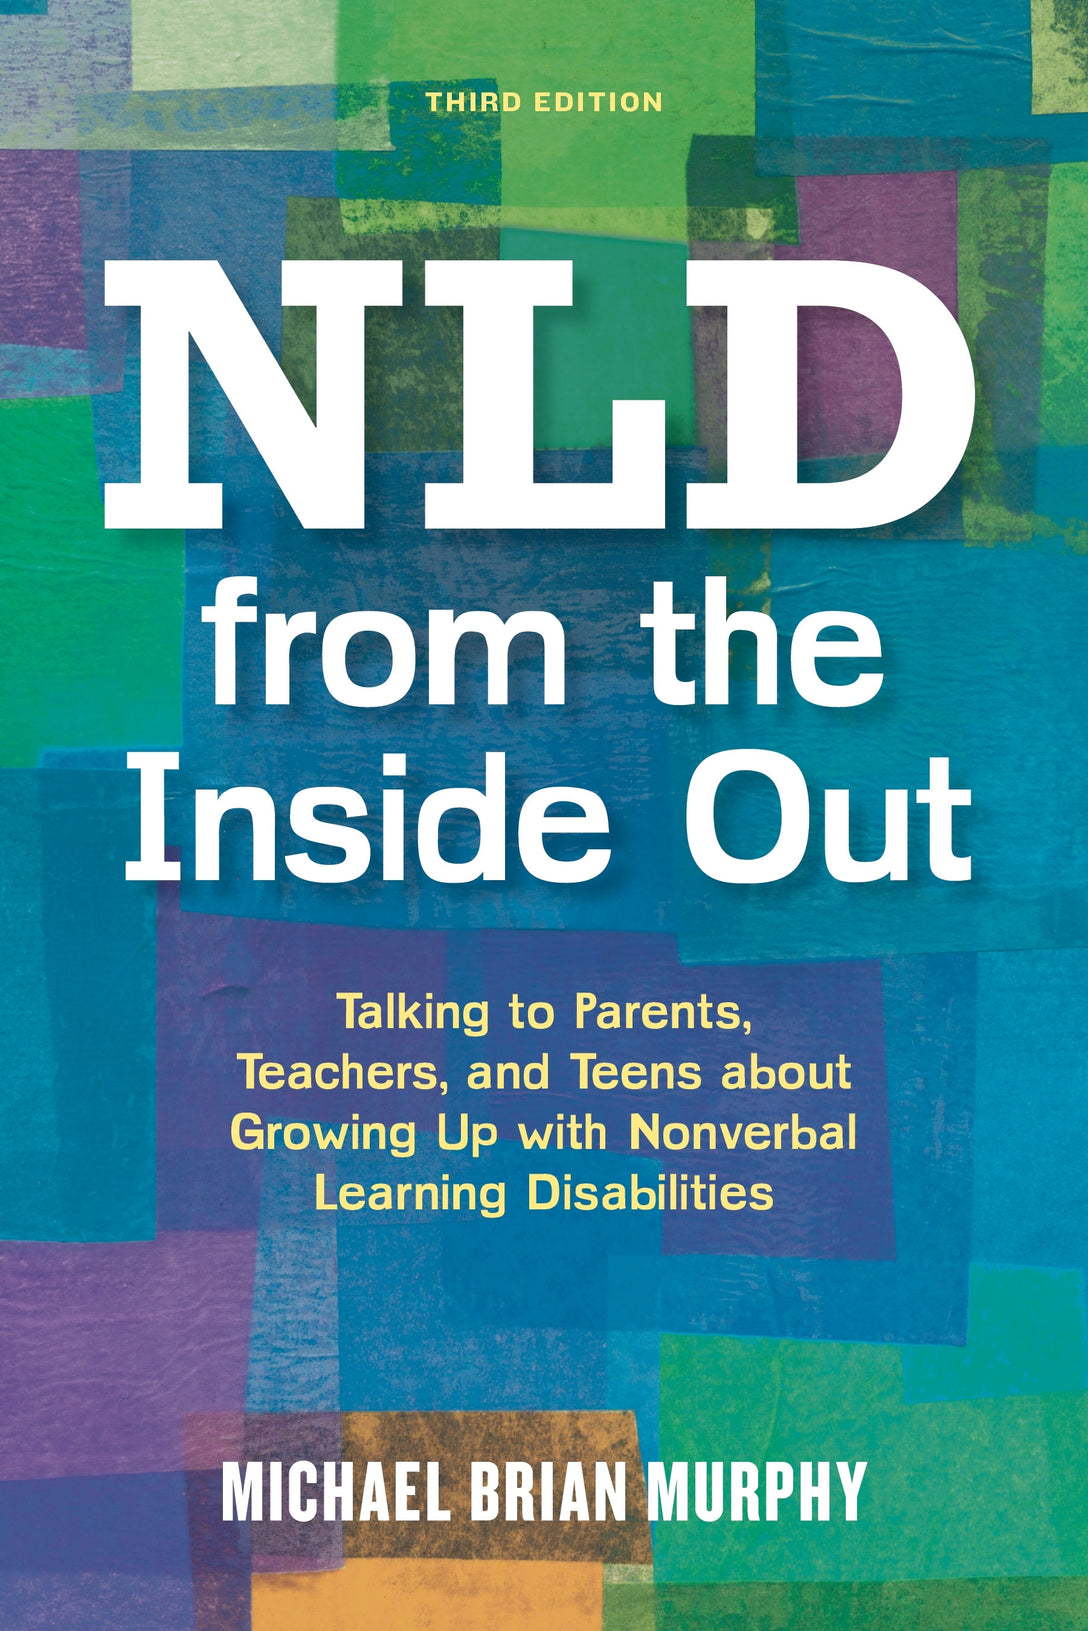 NLD from the Inside Out by Michael Brian Murphy